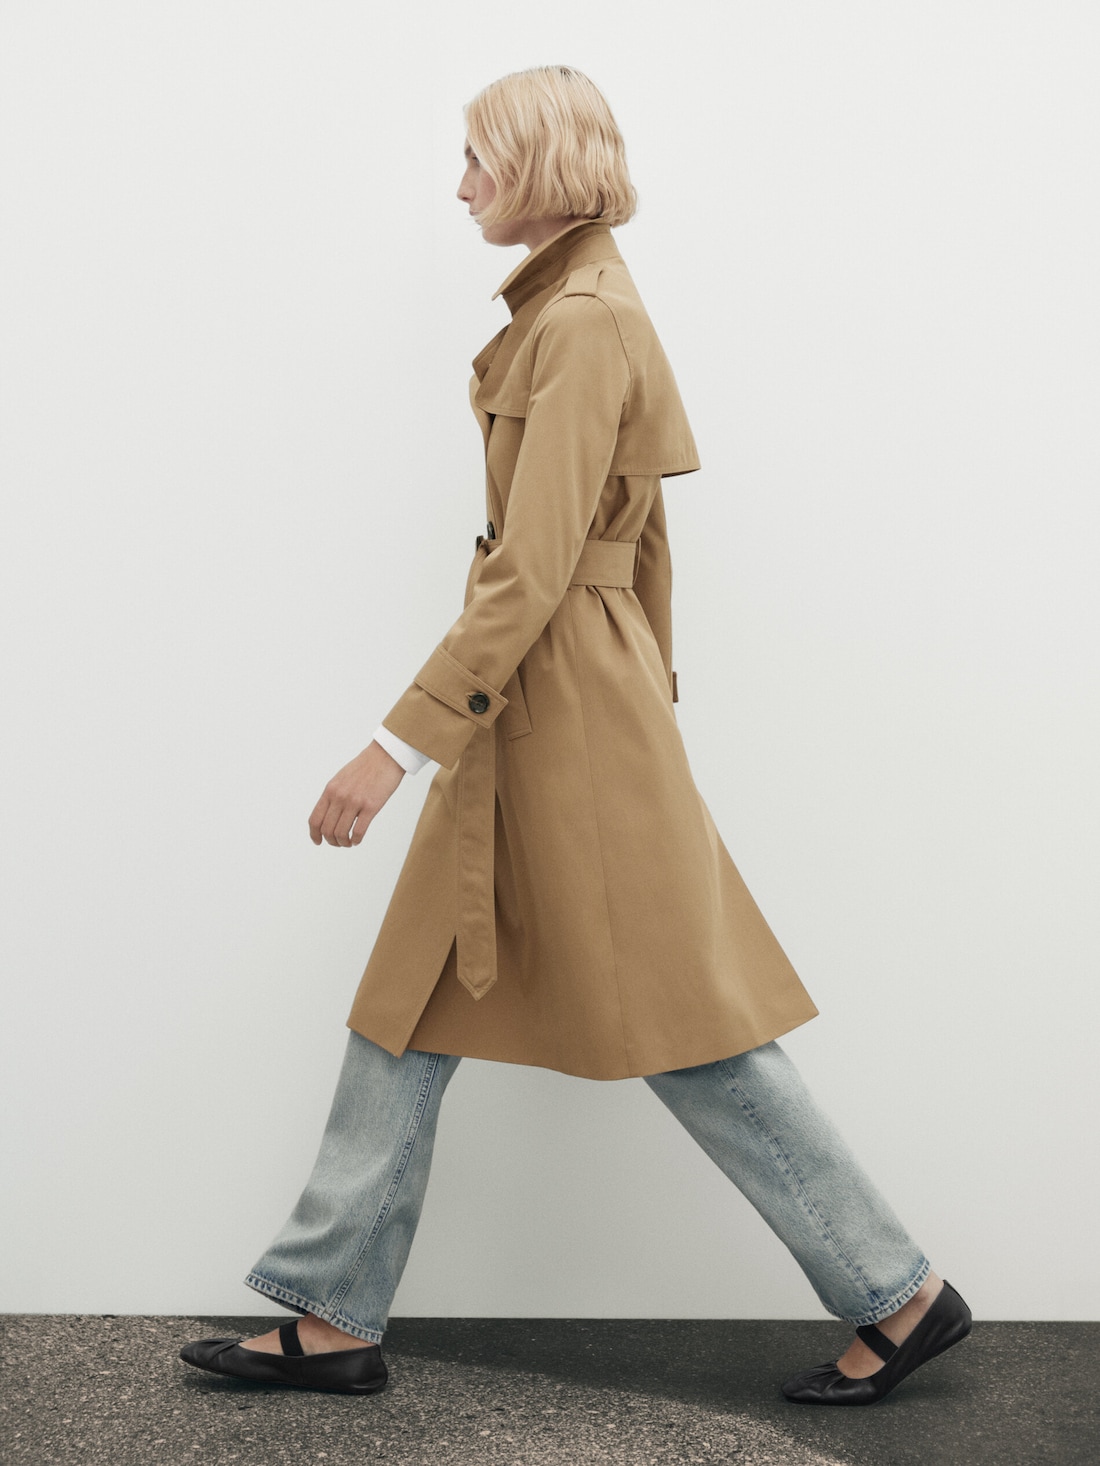 Fall transitional fashion: Trench Coats